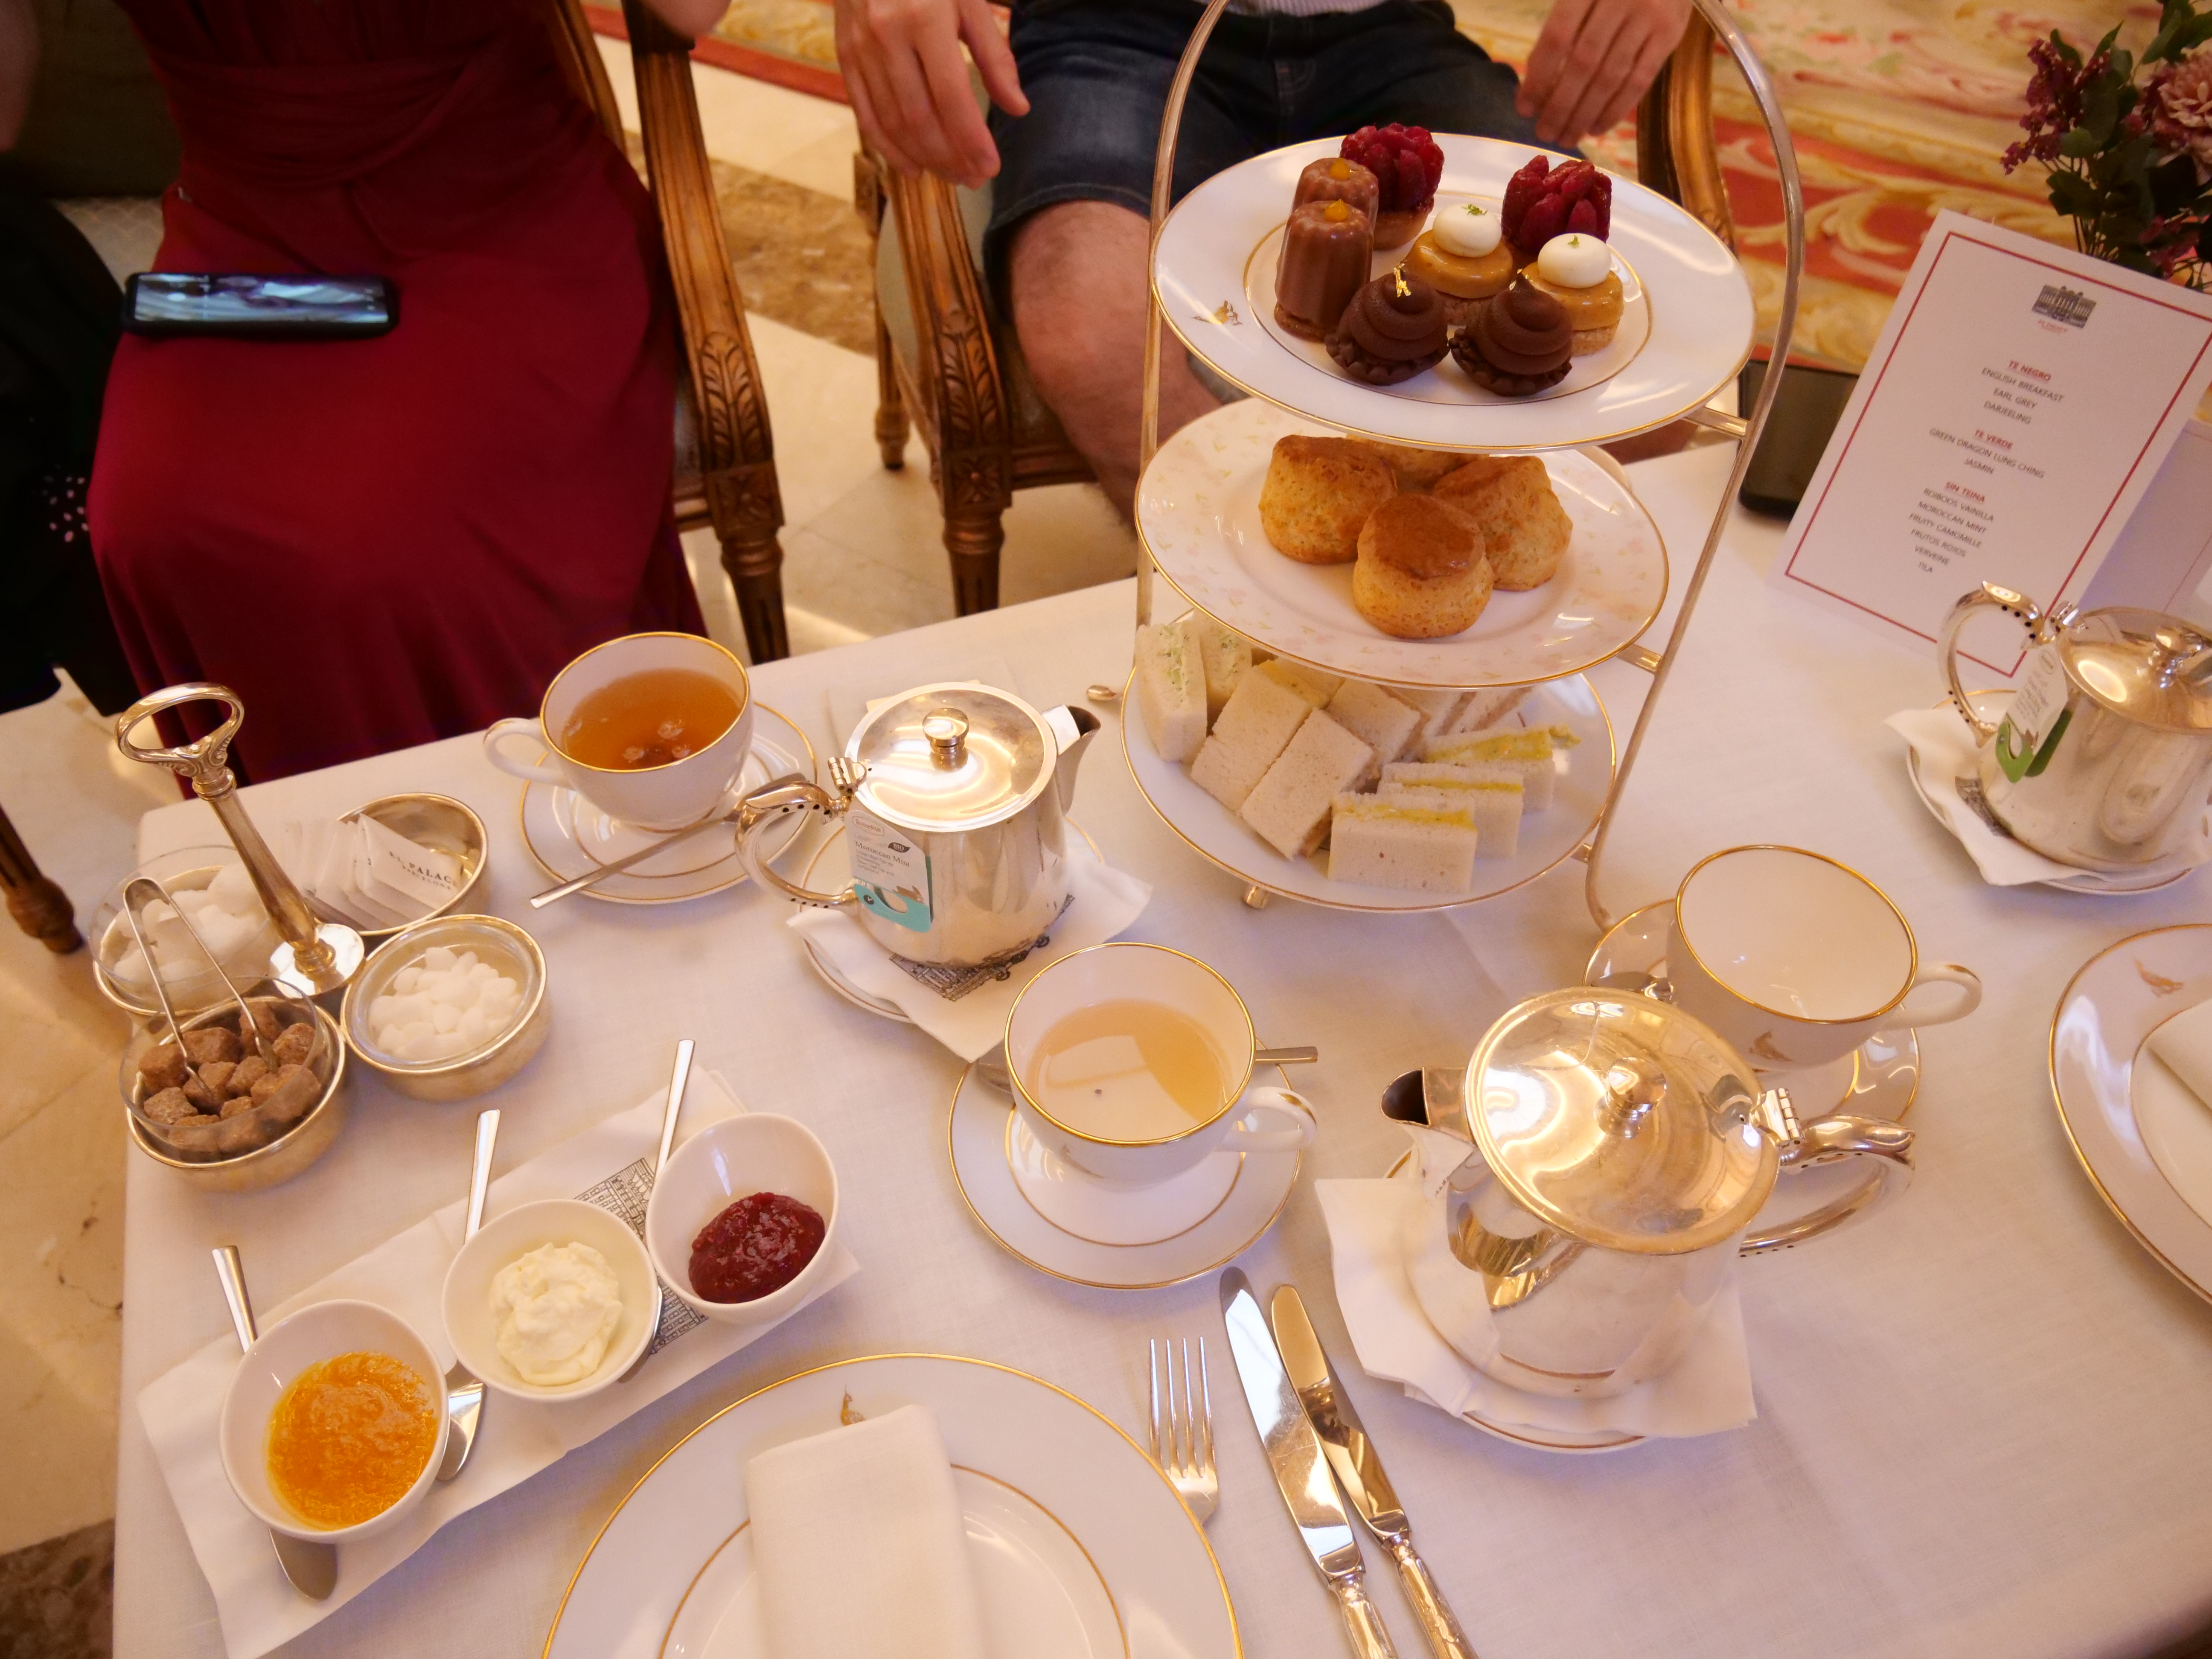 Royal Court Royal Tea Review: An Expensive Disappointment